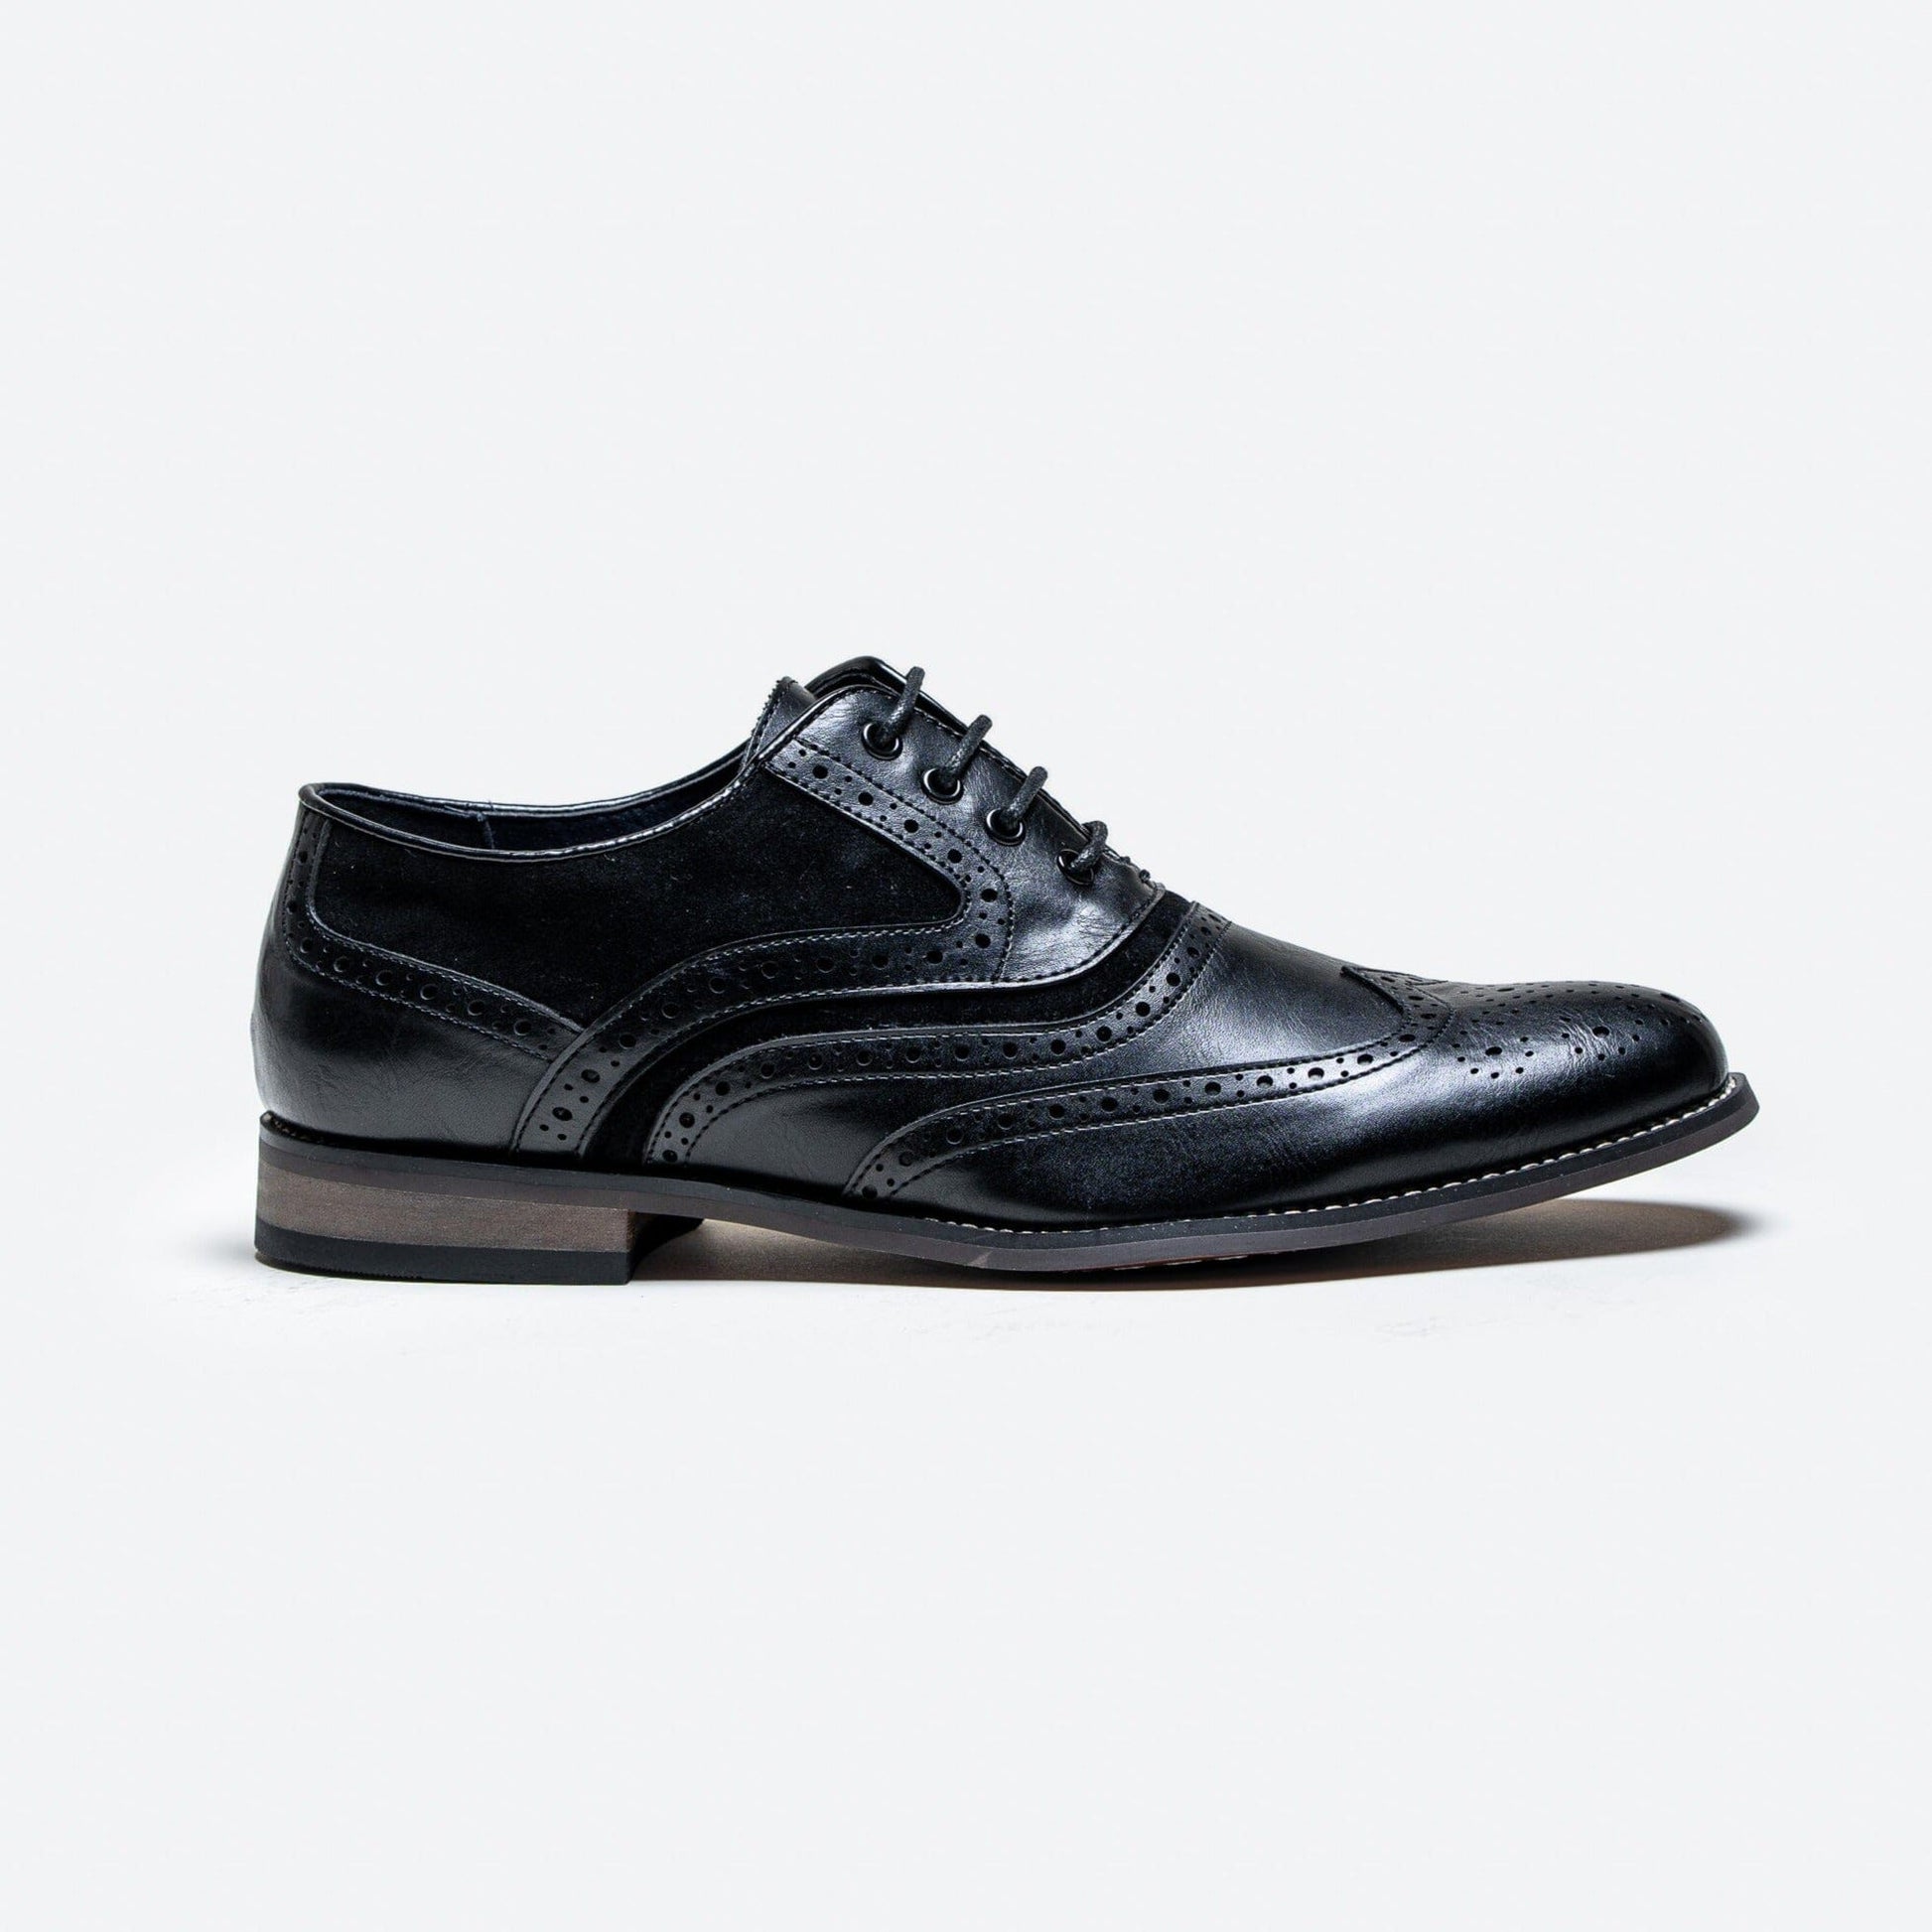 Russel Black Brogue Shoes - Shoes - 7 - THREADPEPPER